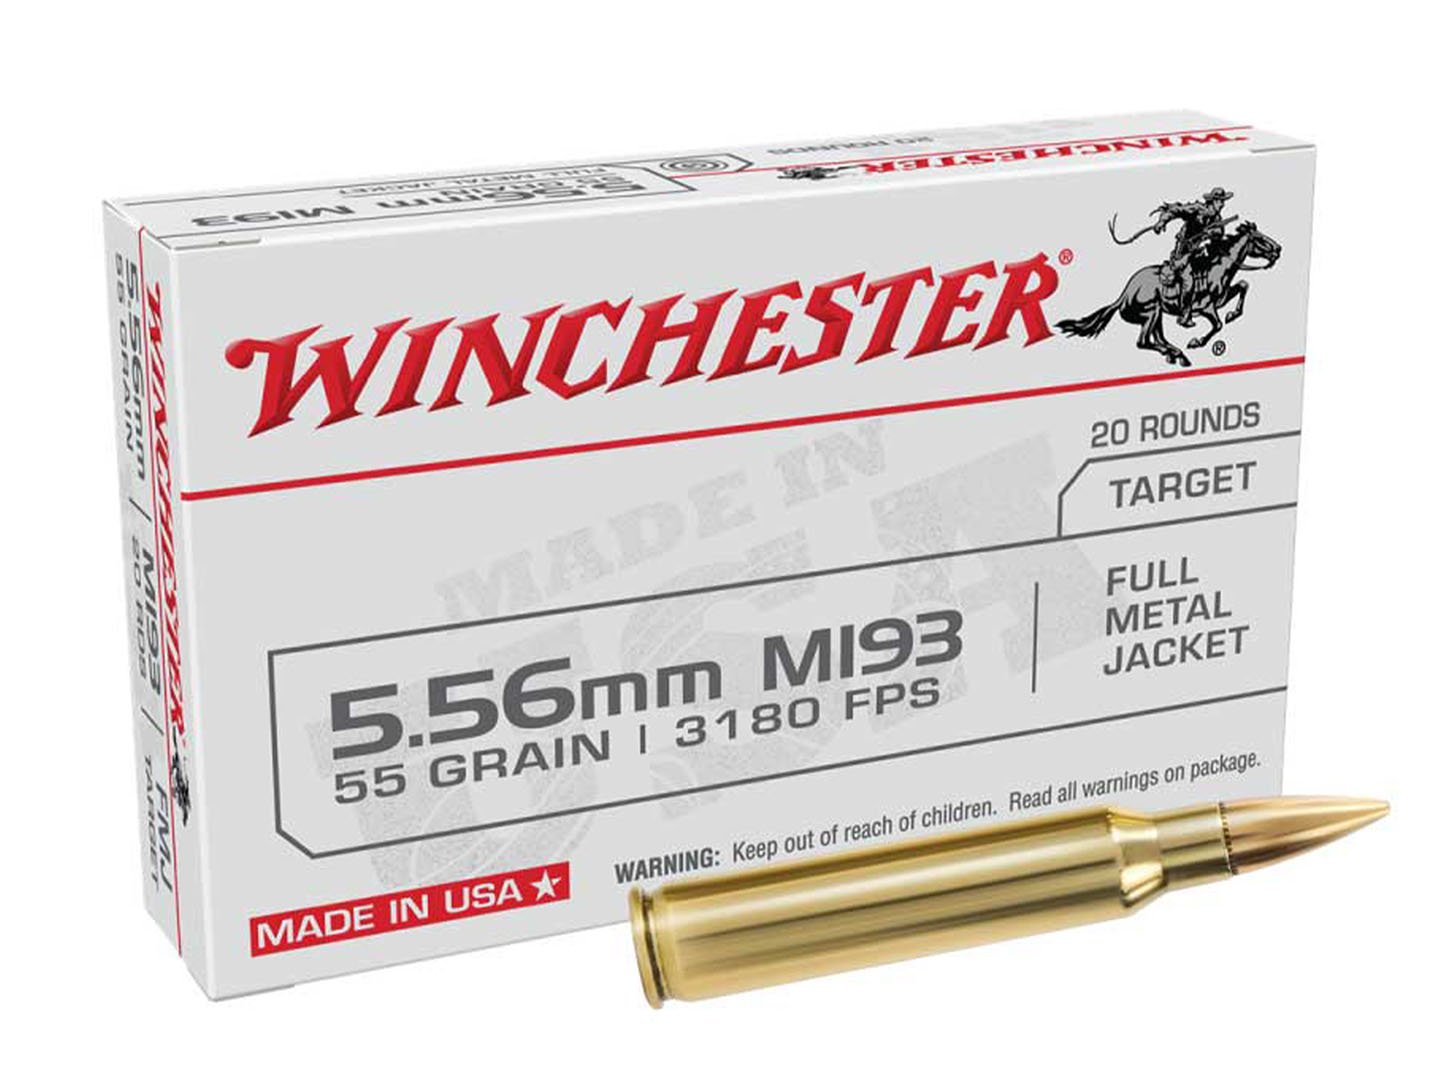 Shooting Like a Pro: Tips for Using Winchester 5.56mm Centerfire FMJ Ammo